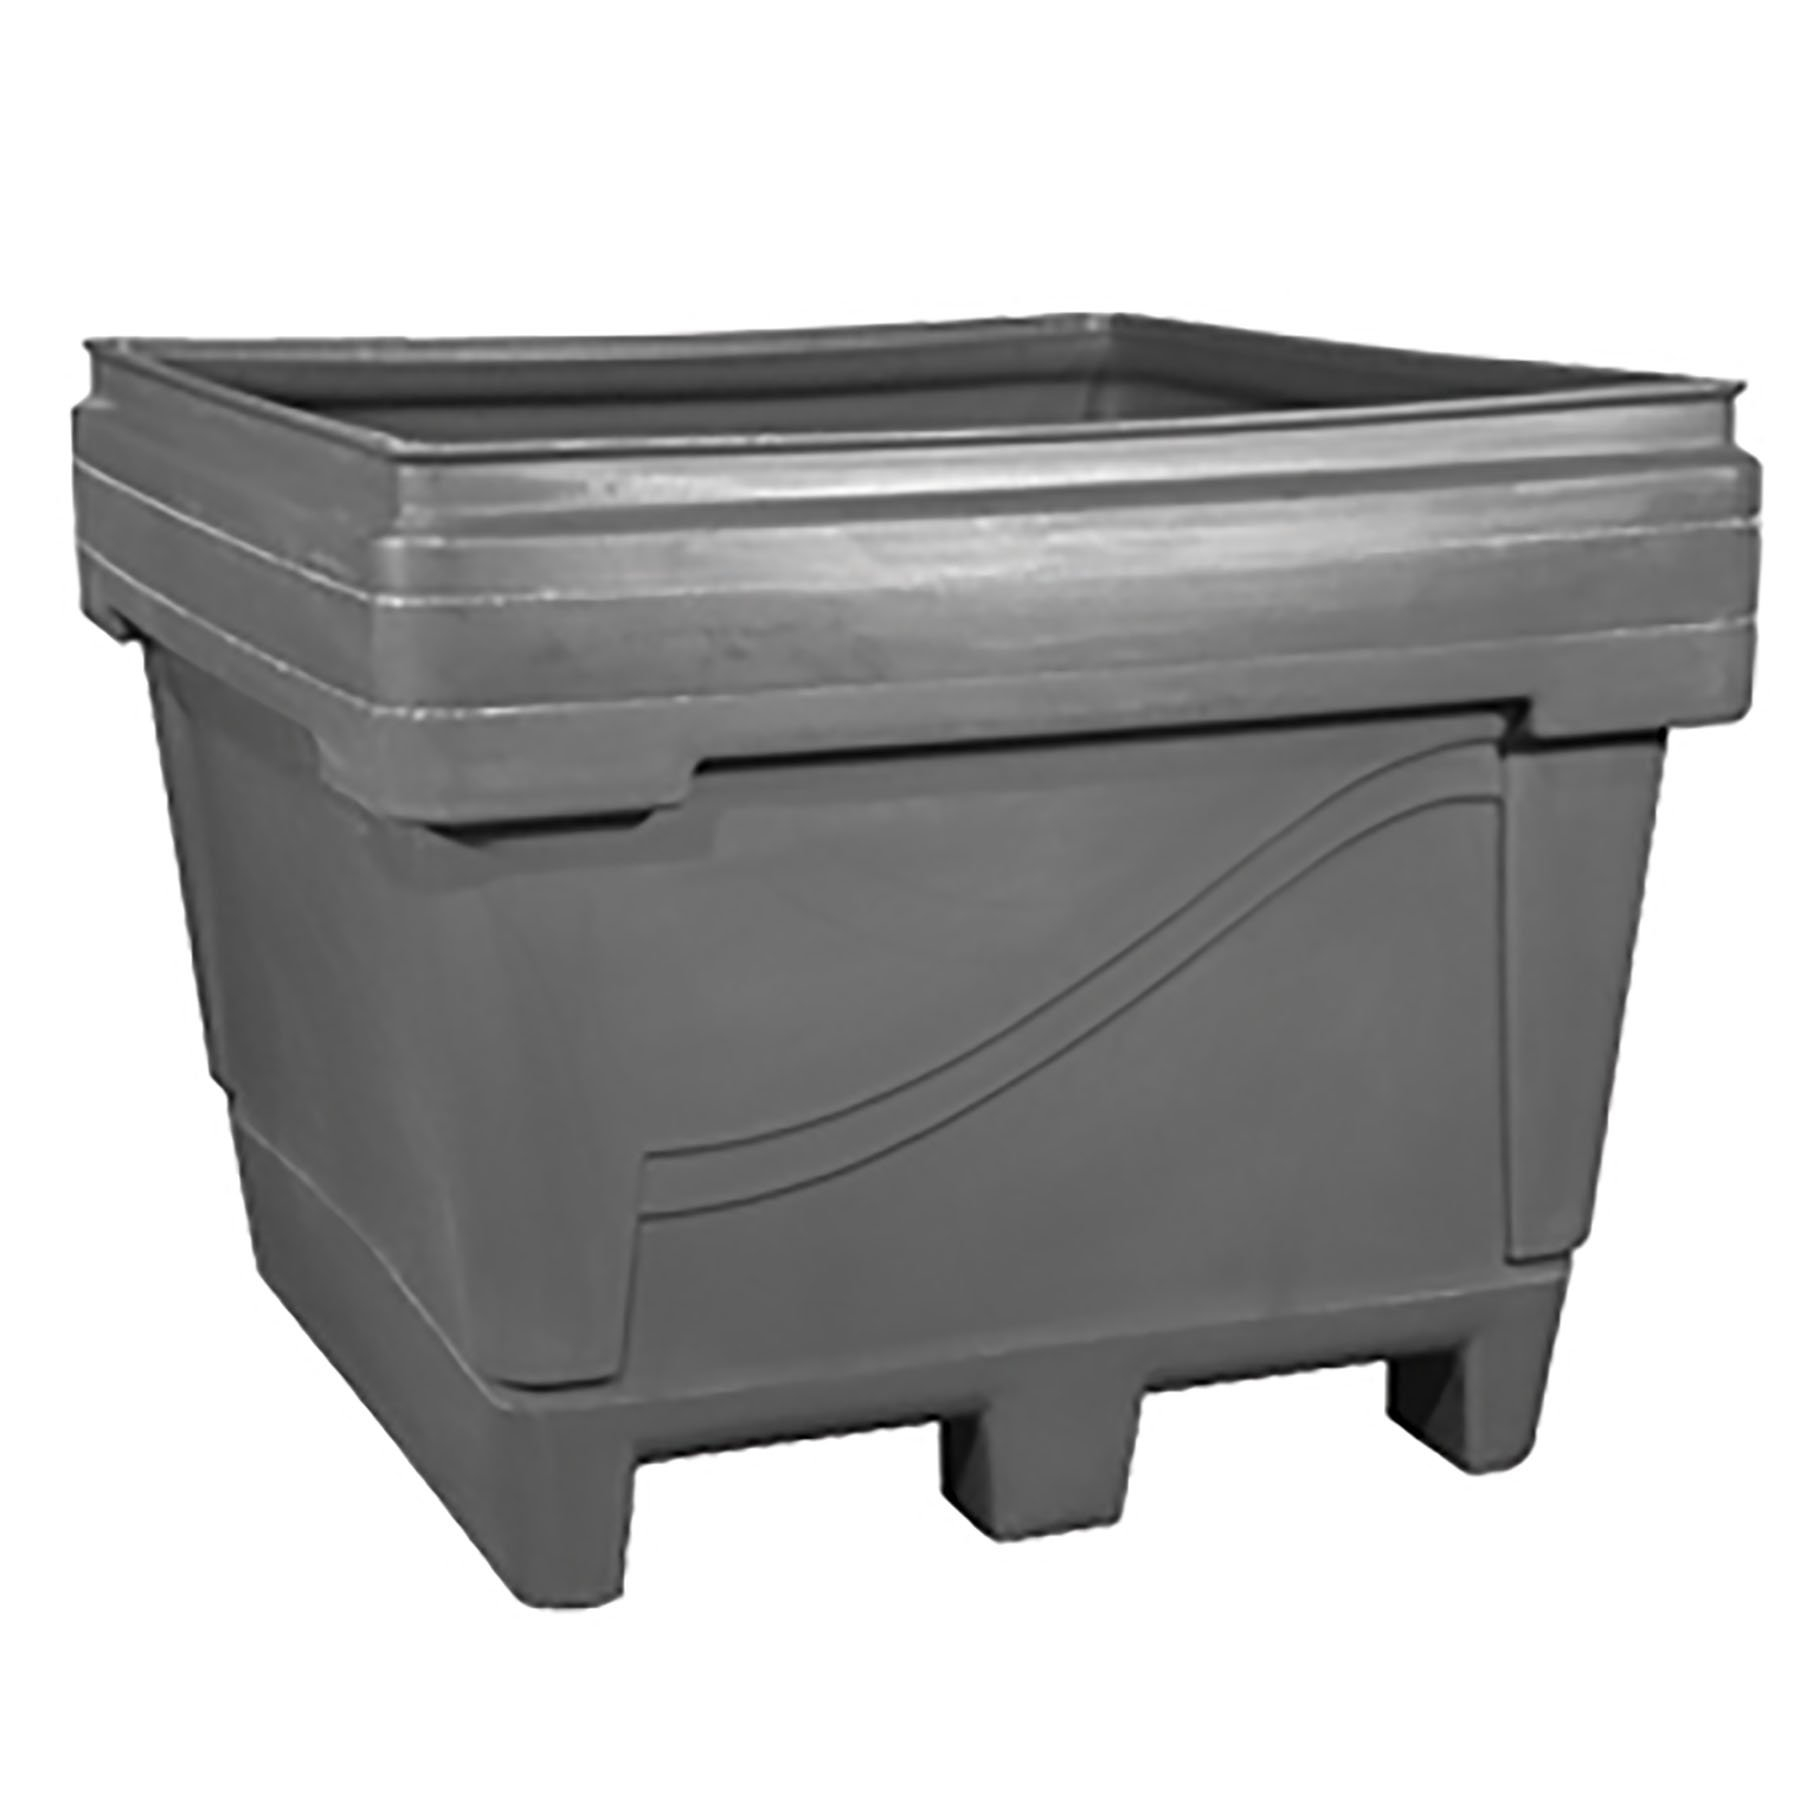 Ibc Totes Intermediate Bulk Containers The Cary Company throughout sizing 1800 X 1800